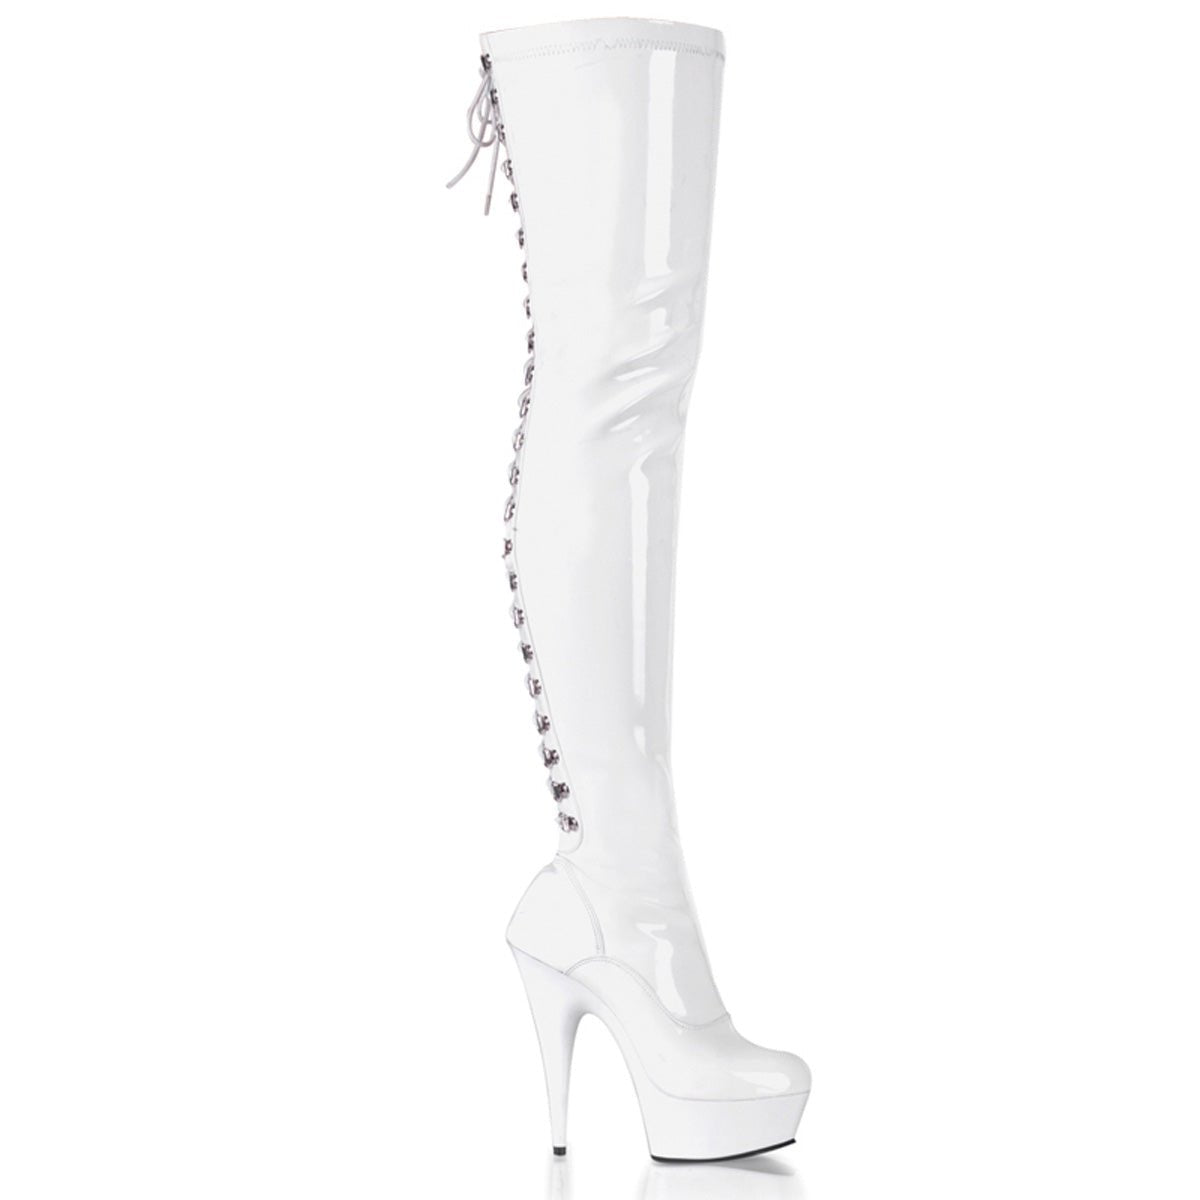 Pleaser DELIGHT 3063 Platform Boots,Back Lace Boots,Stretch Fit Boots - From Pleaser Sold By Alternative Footwear